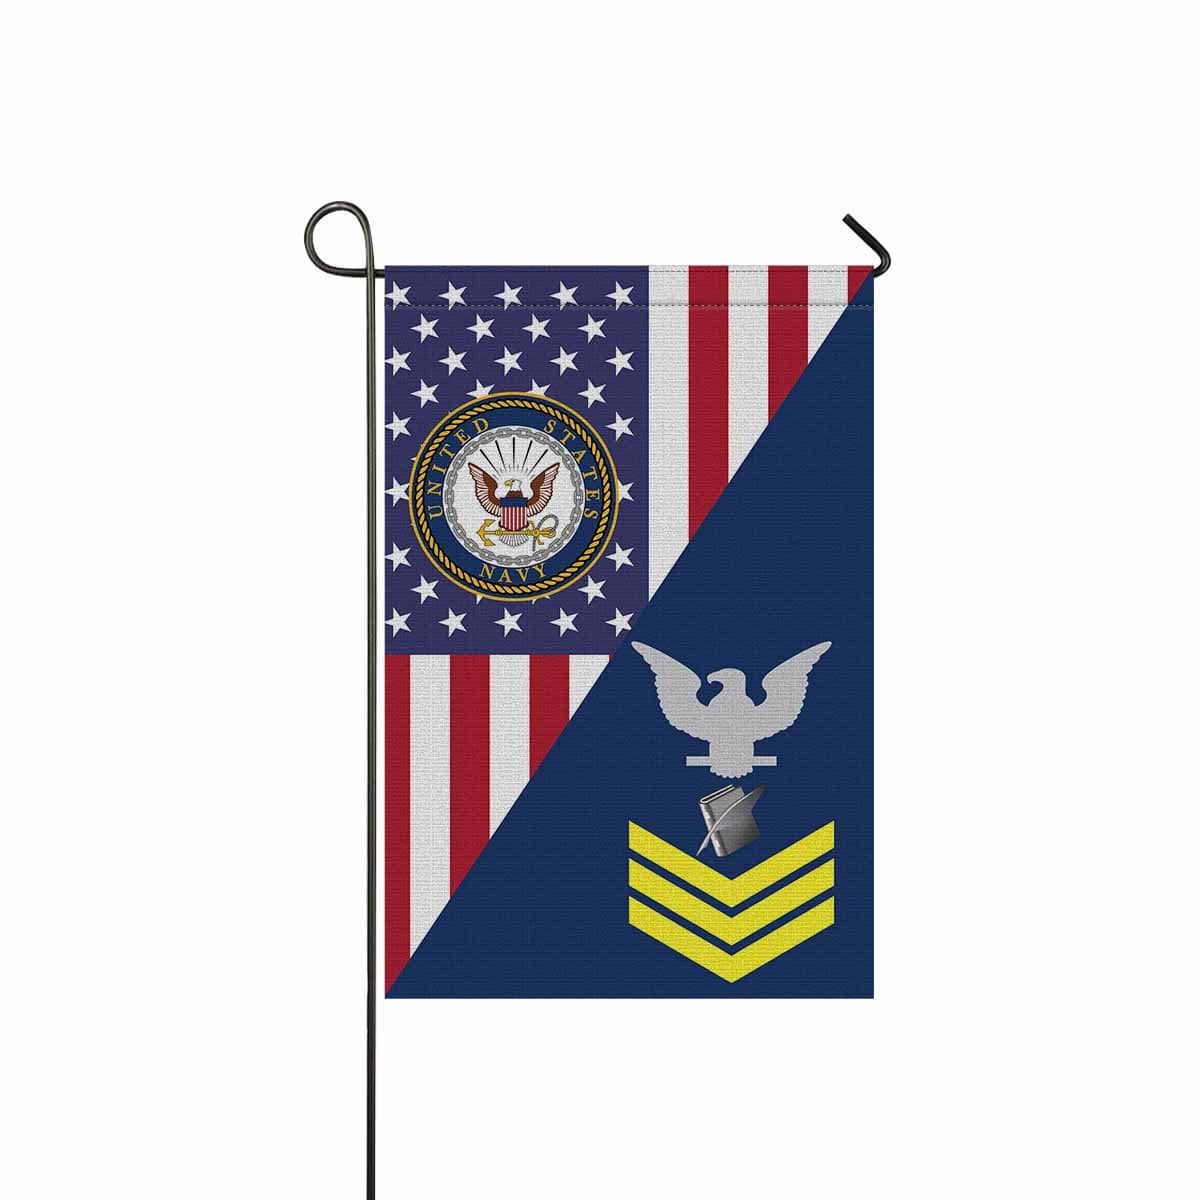 Navy Personnel Specialist Navy PS E-6 Gold Stripe Garden Flag/Yard Flag 12 inches x 18 inches Twin-Side Printing-GDFlag-Navy-Rating-Veterans Nation